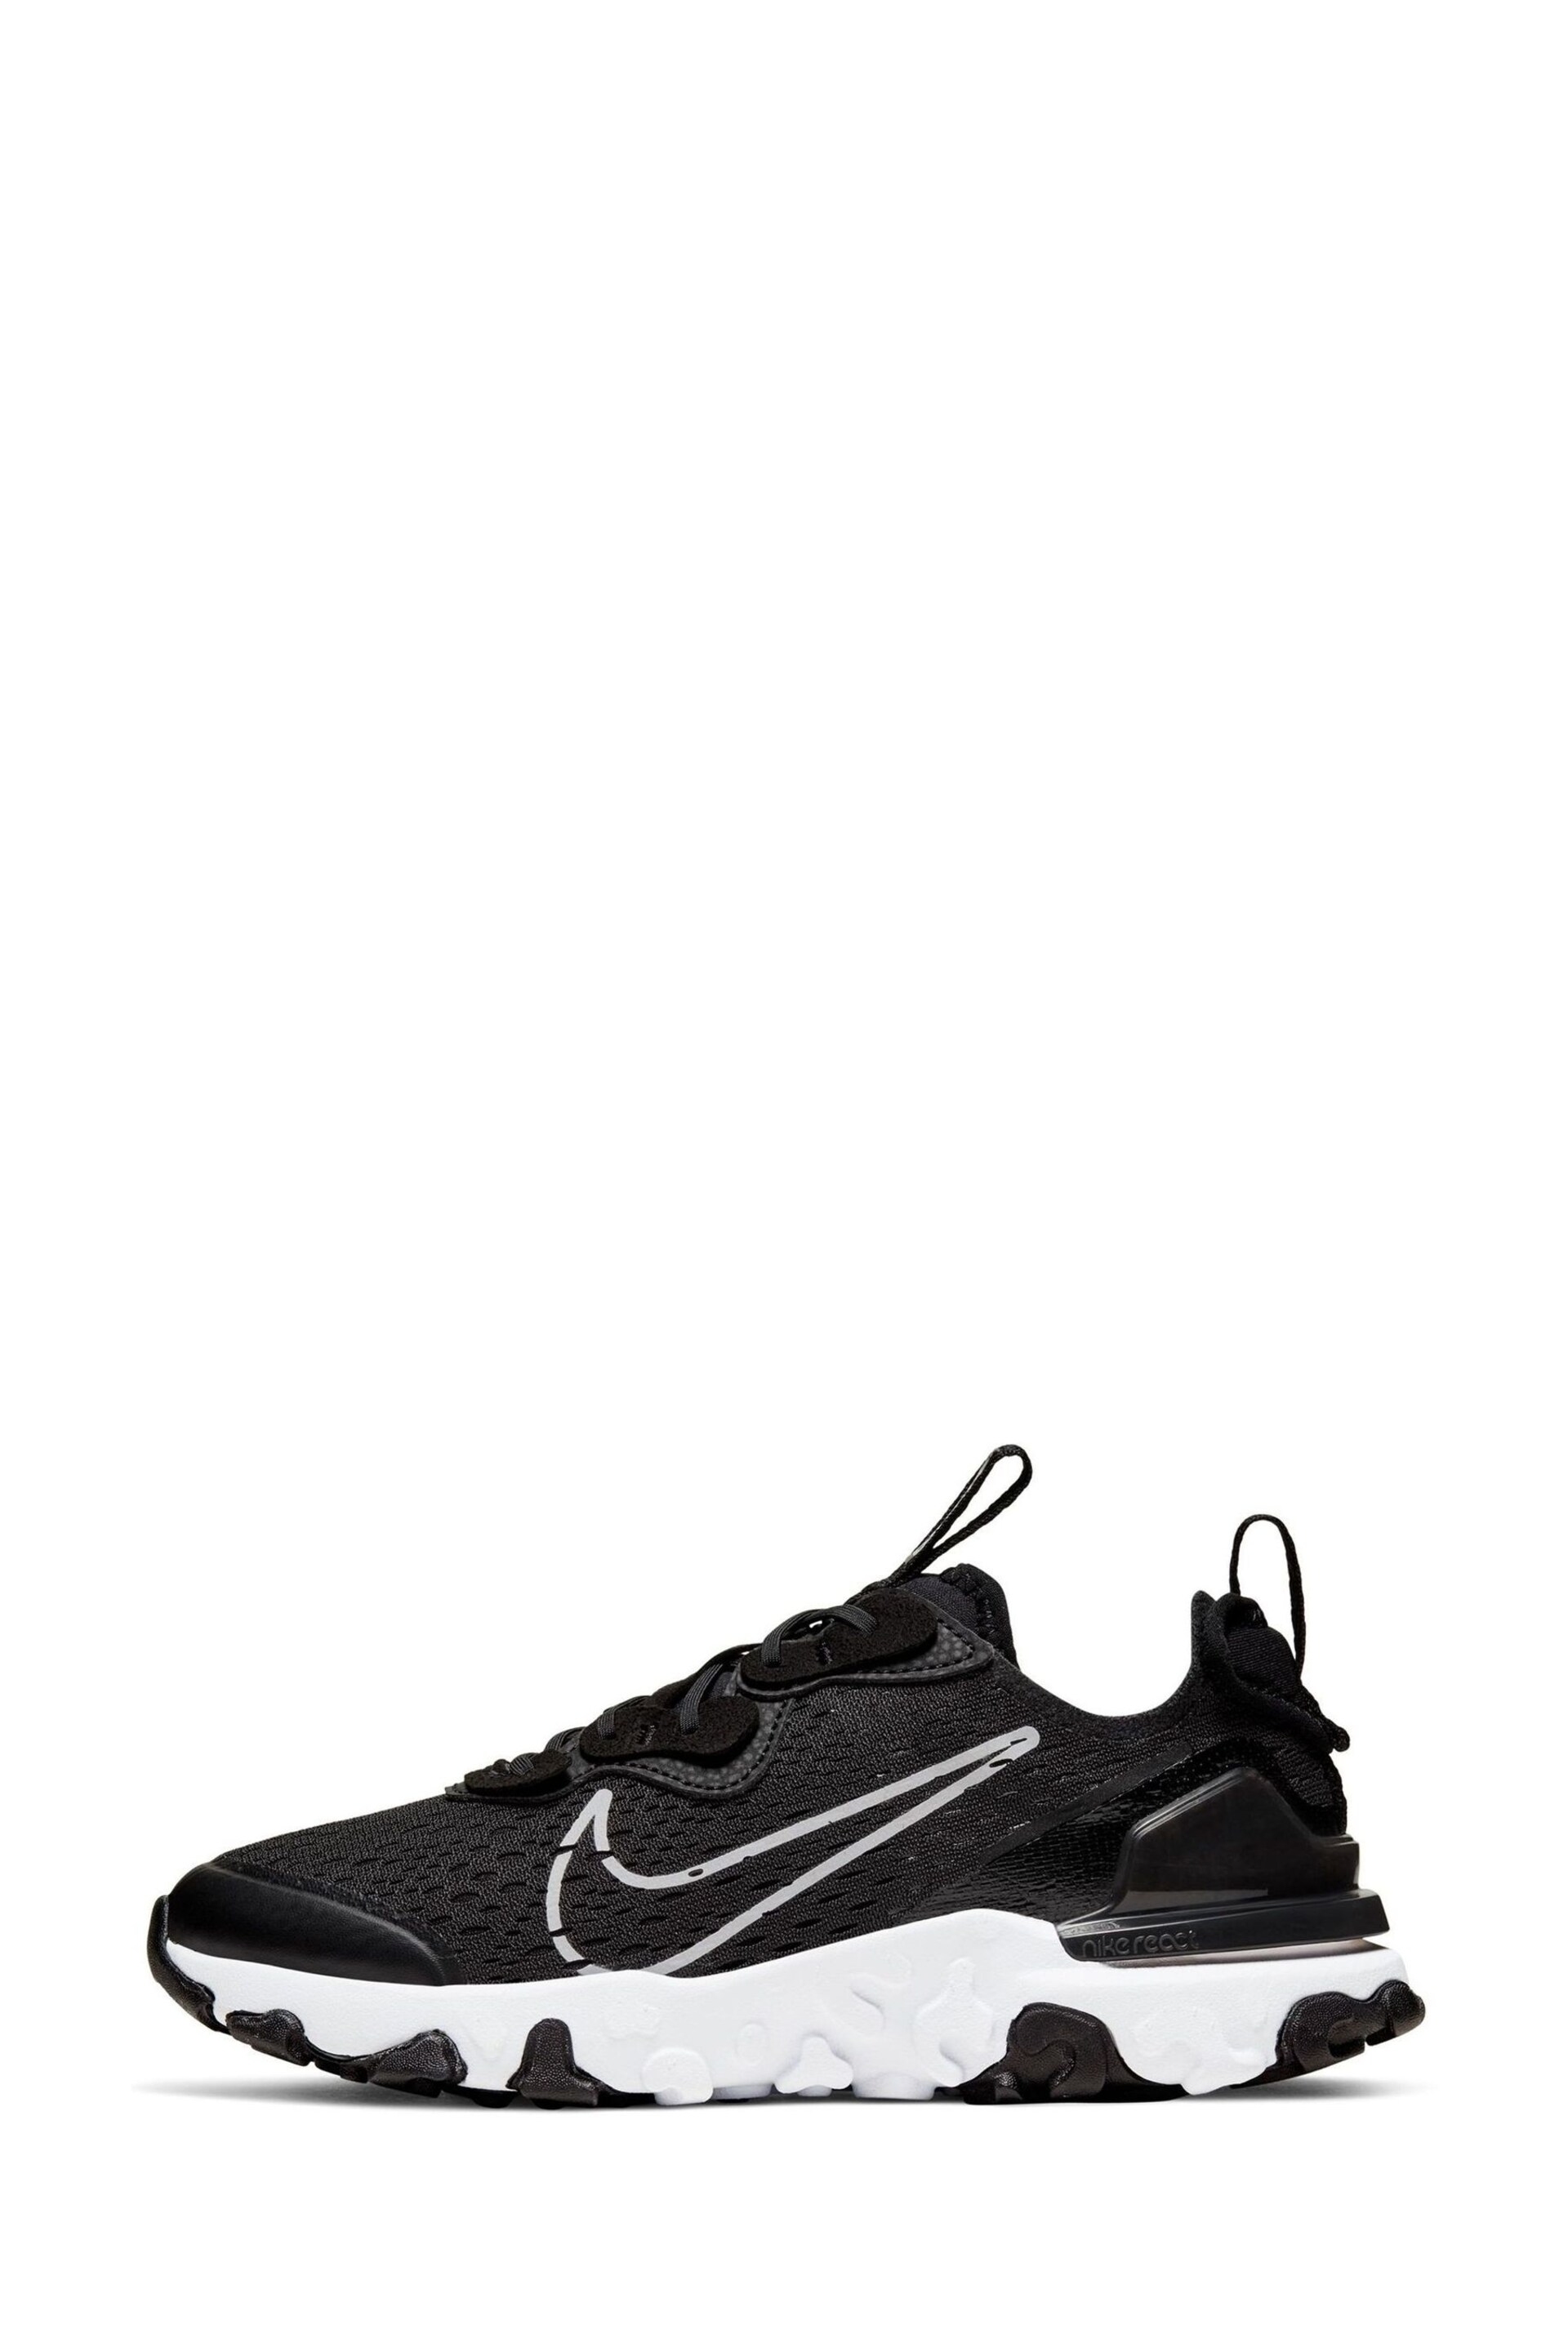 Nike Black/White React Vision Youth Trainers - Image 1 of 4